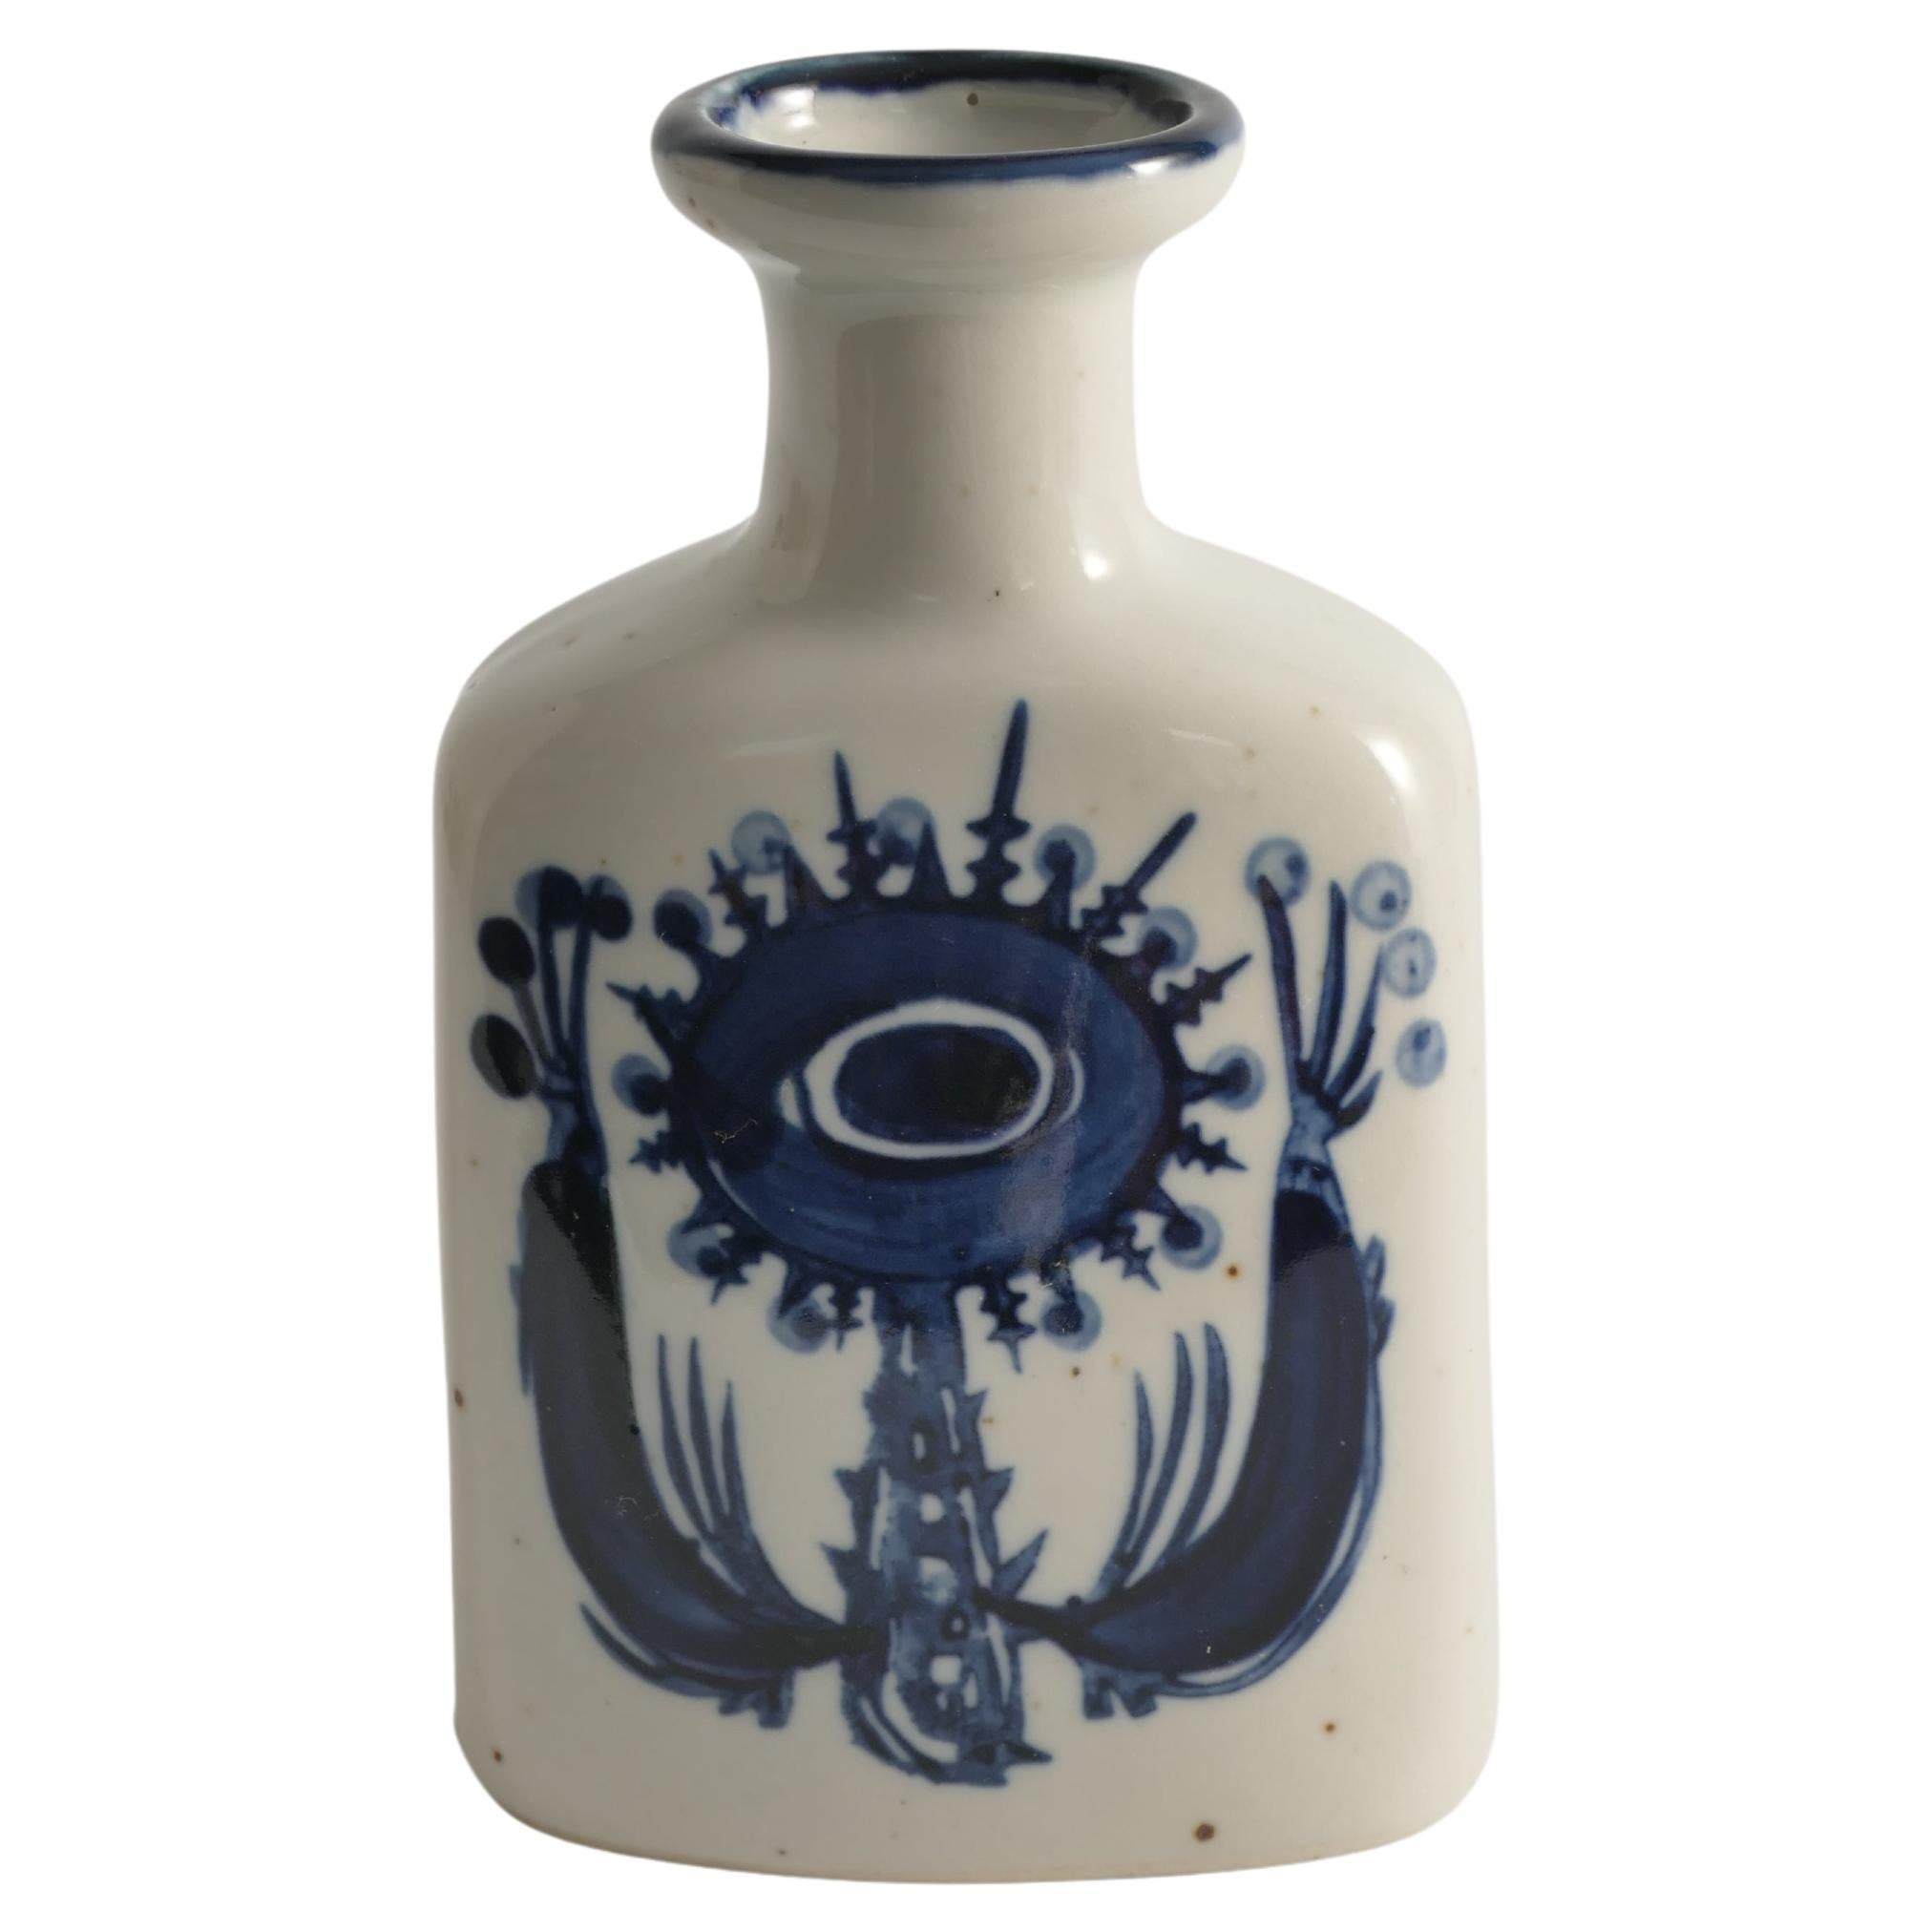 This Scandinavian modern indigo blue flower motif stoneware vase, attributed to Berte Jessen of Royal Copenhagen, is a beautifully crafted piece featuring hand-painted indigo blue motifs on each side. The design depicts both large and small fantasy